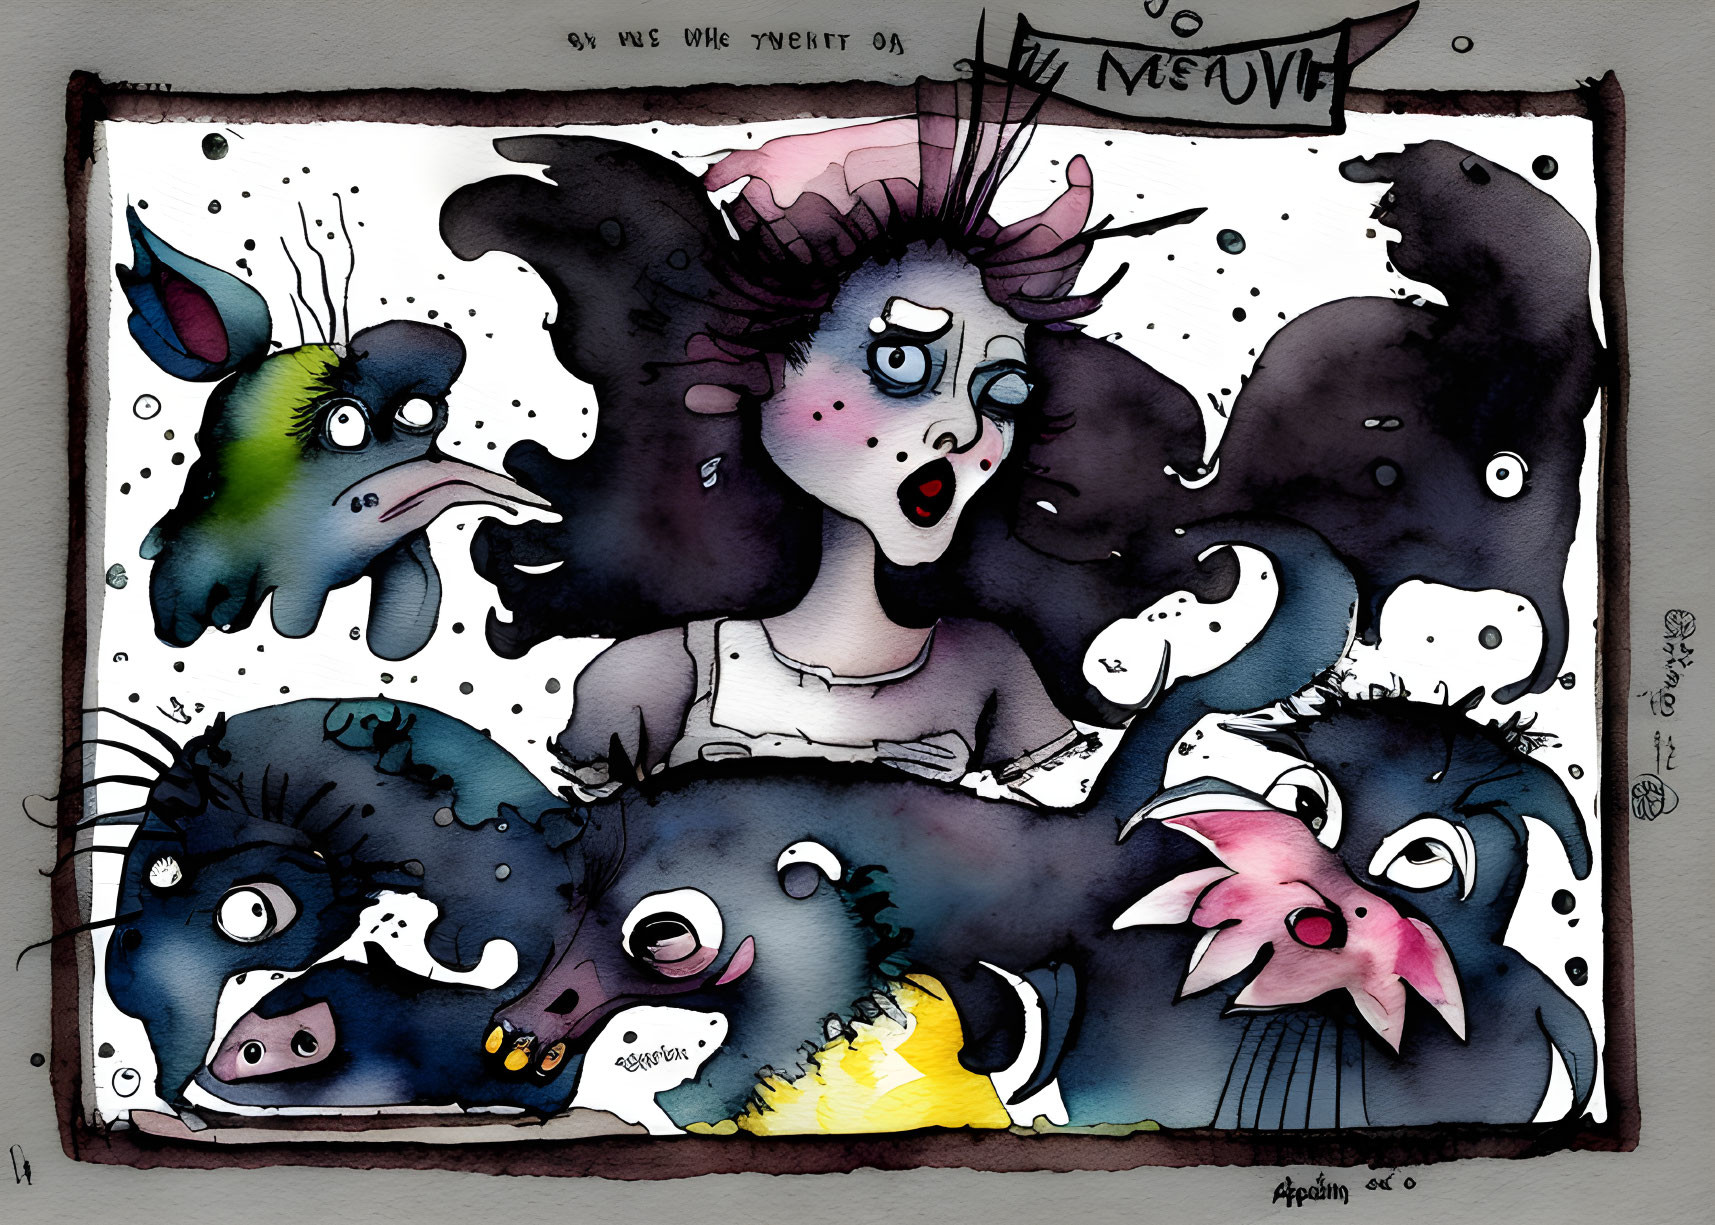 Whimsical watercolor illustration of surprised woman with quirky creatures